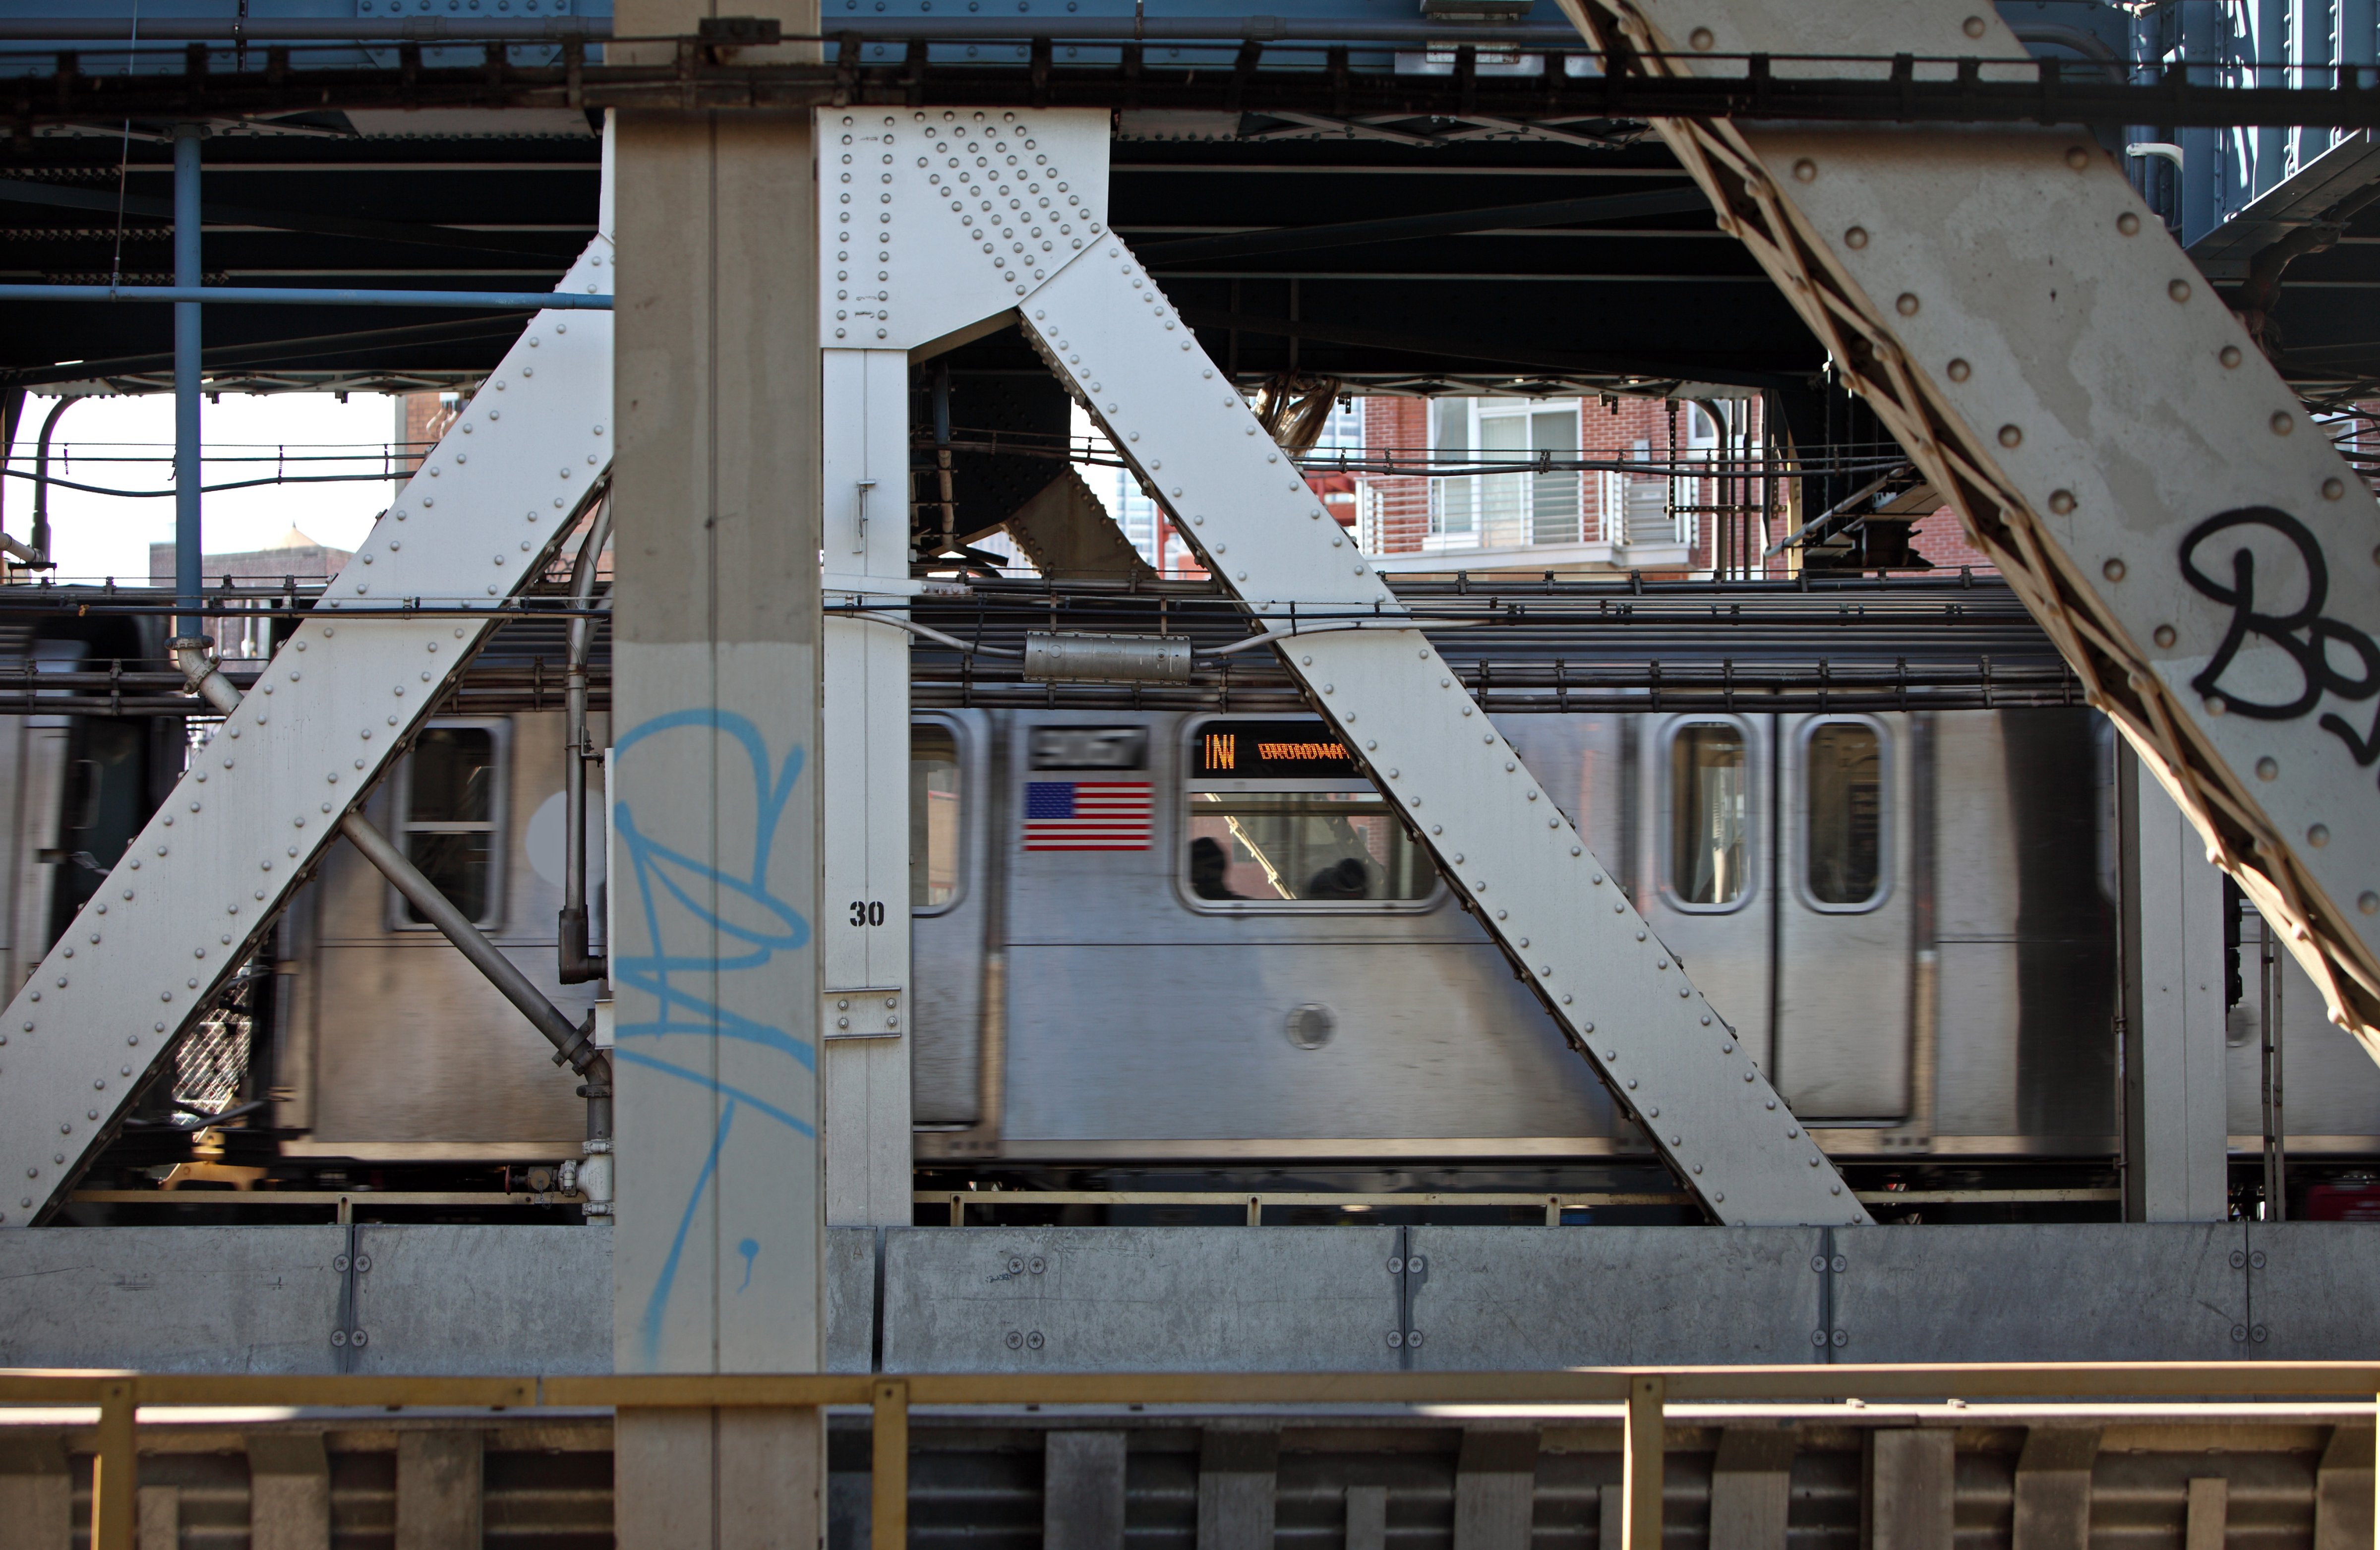 Most subway cars pass over the Manhattan Bridge, as pictured here, without cricket incidents. (Terraxplorer—Getty Images/iStockphoto)